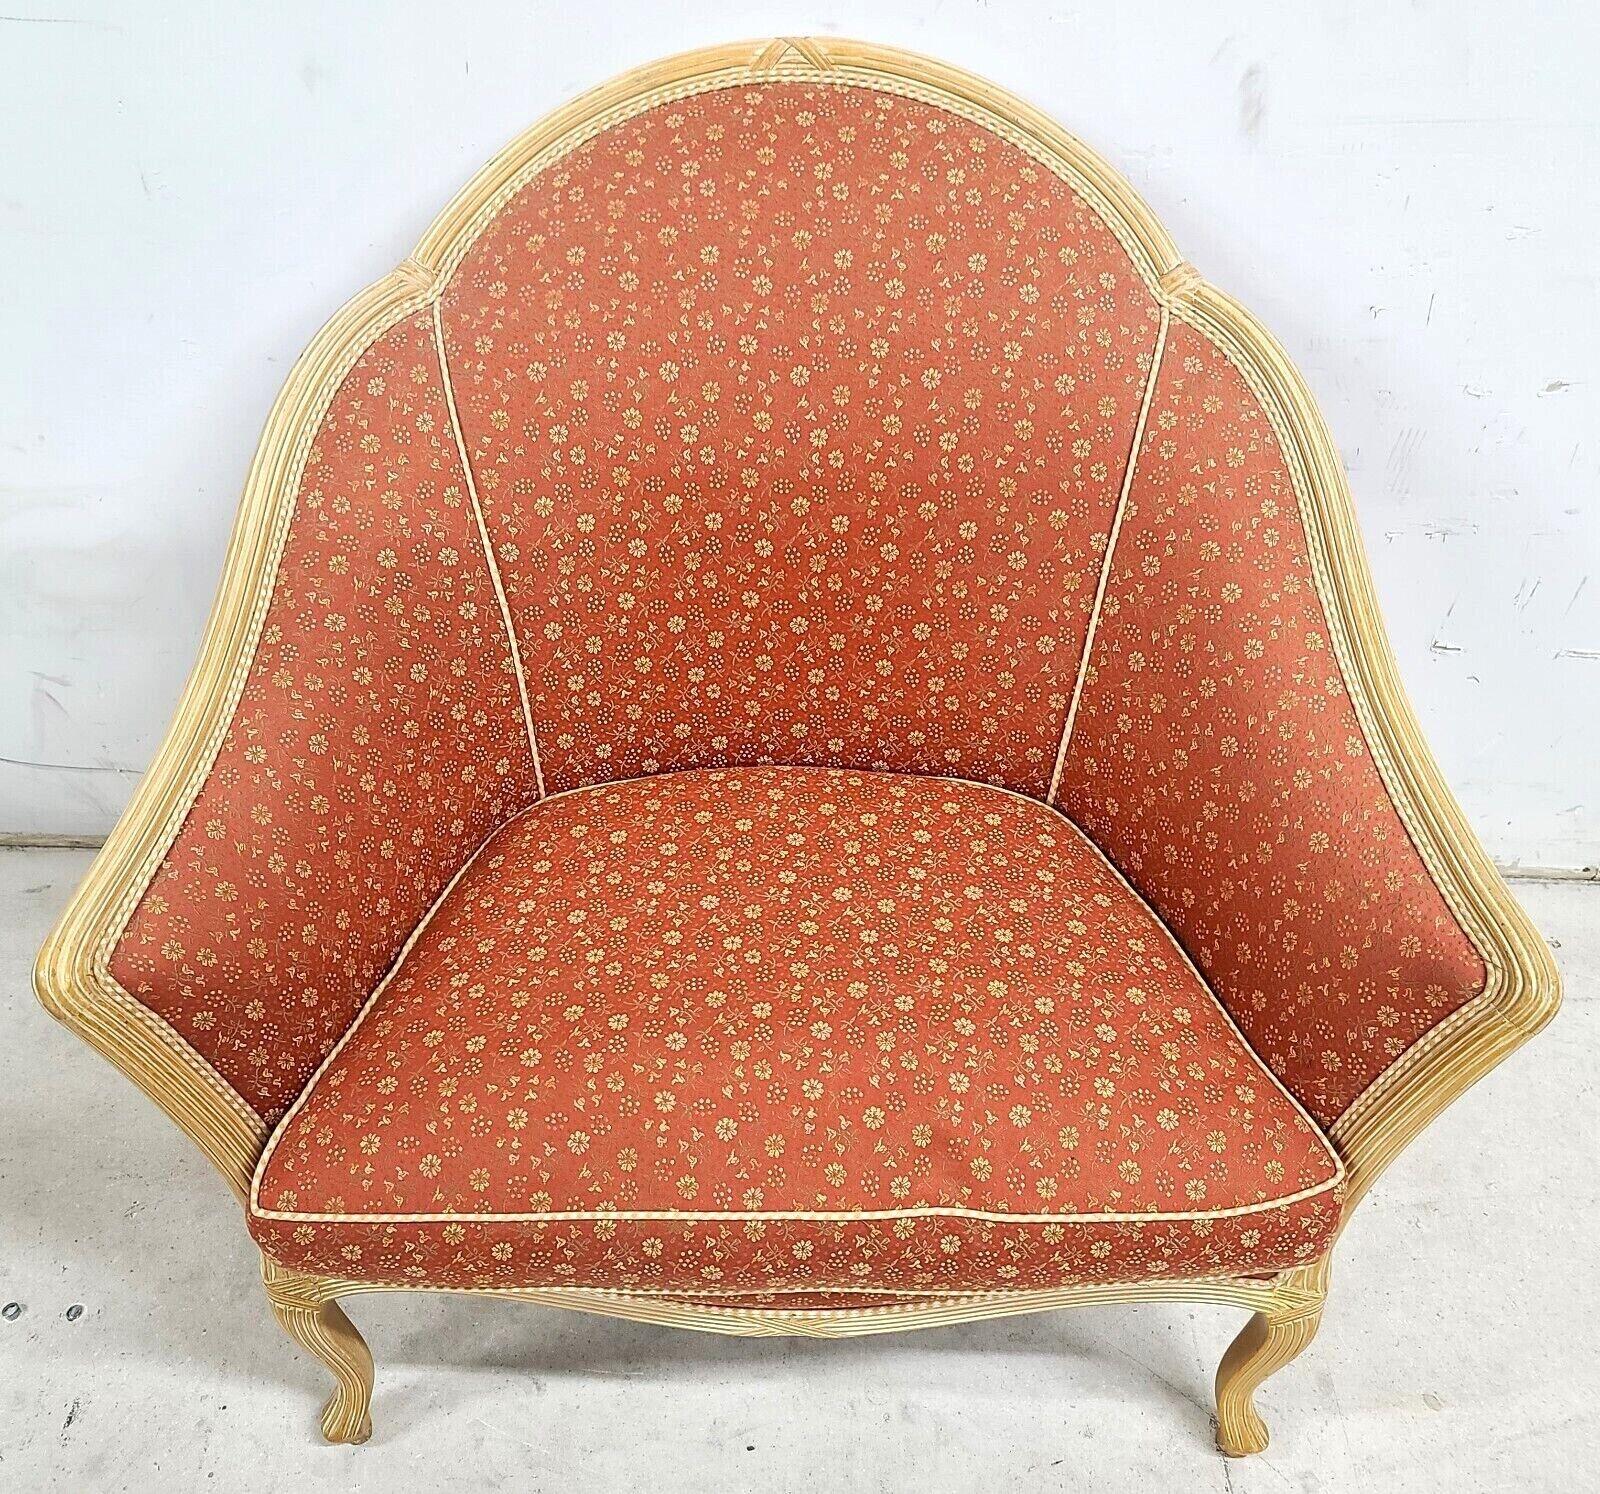 Custom Designer French Provincial Louis XV Style Floral Apricot Settee Chair
Seat cushion is foam surrounded by down feathers for maximum comfort without sagging.

Approximate Measurements in Inches
33